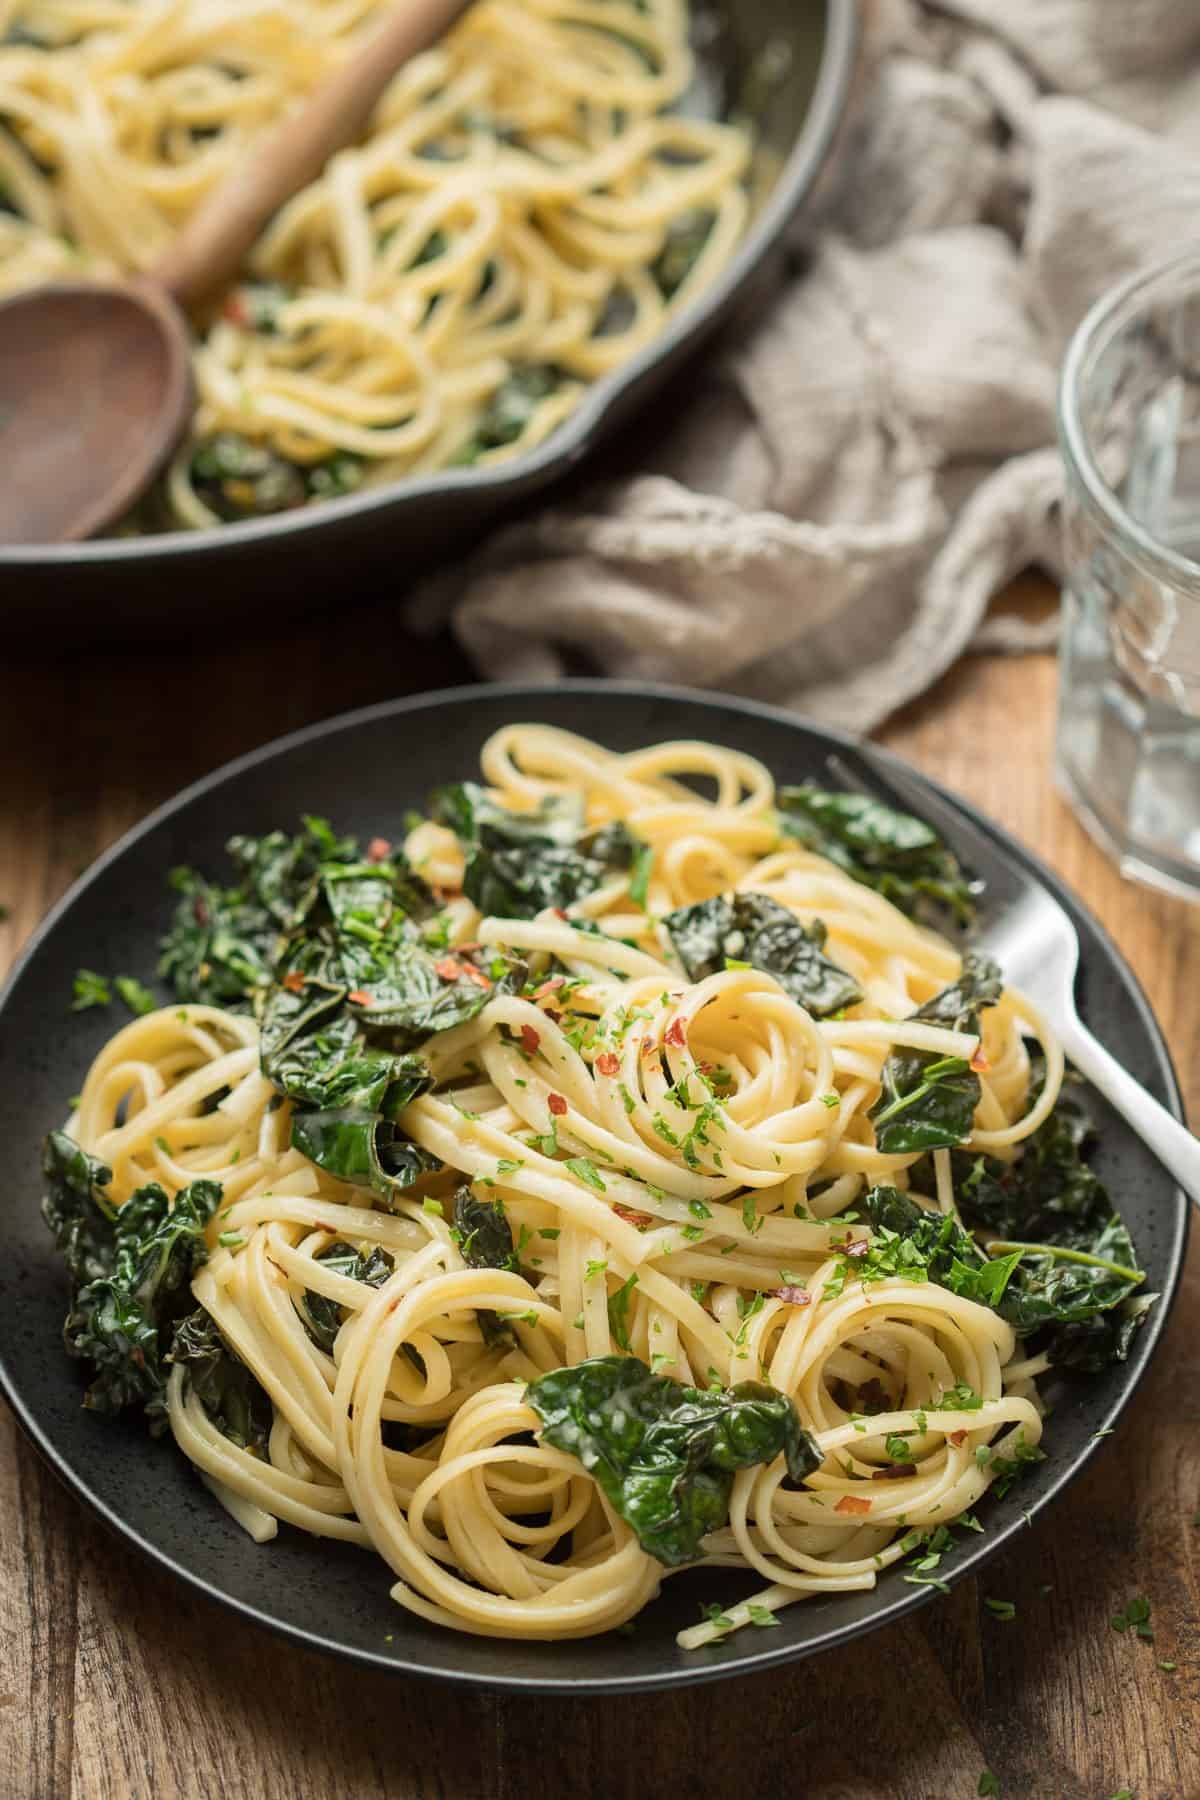 Plate of Creamy Kale Pasta with Skillet in the Background